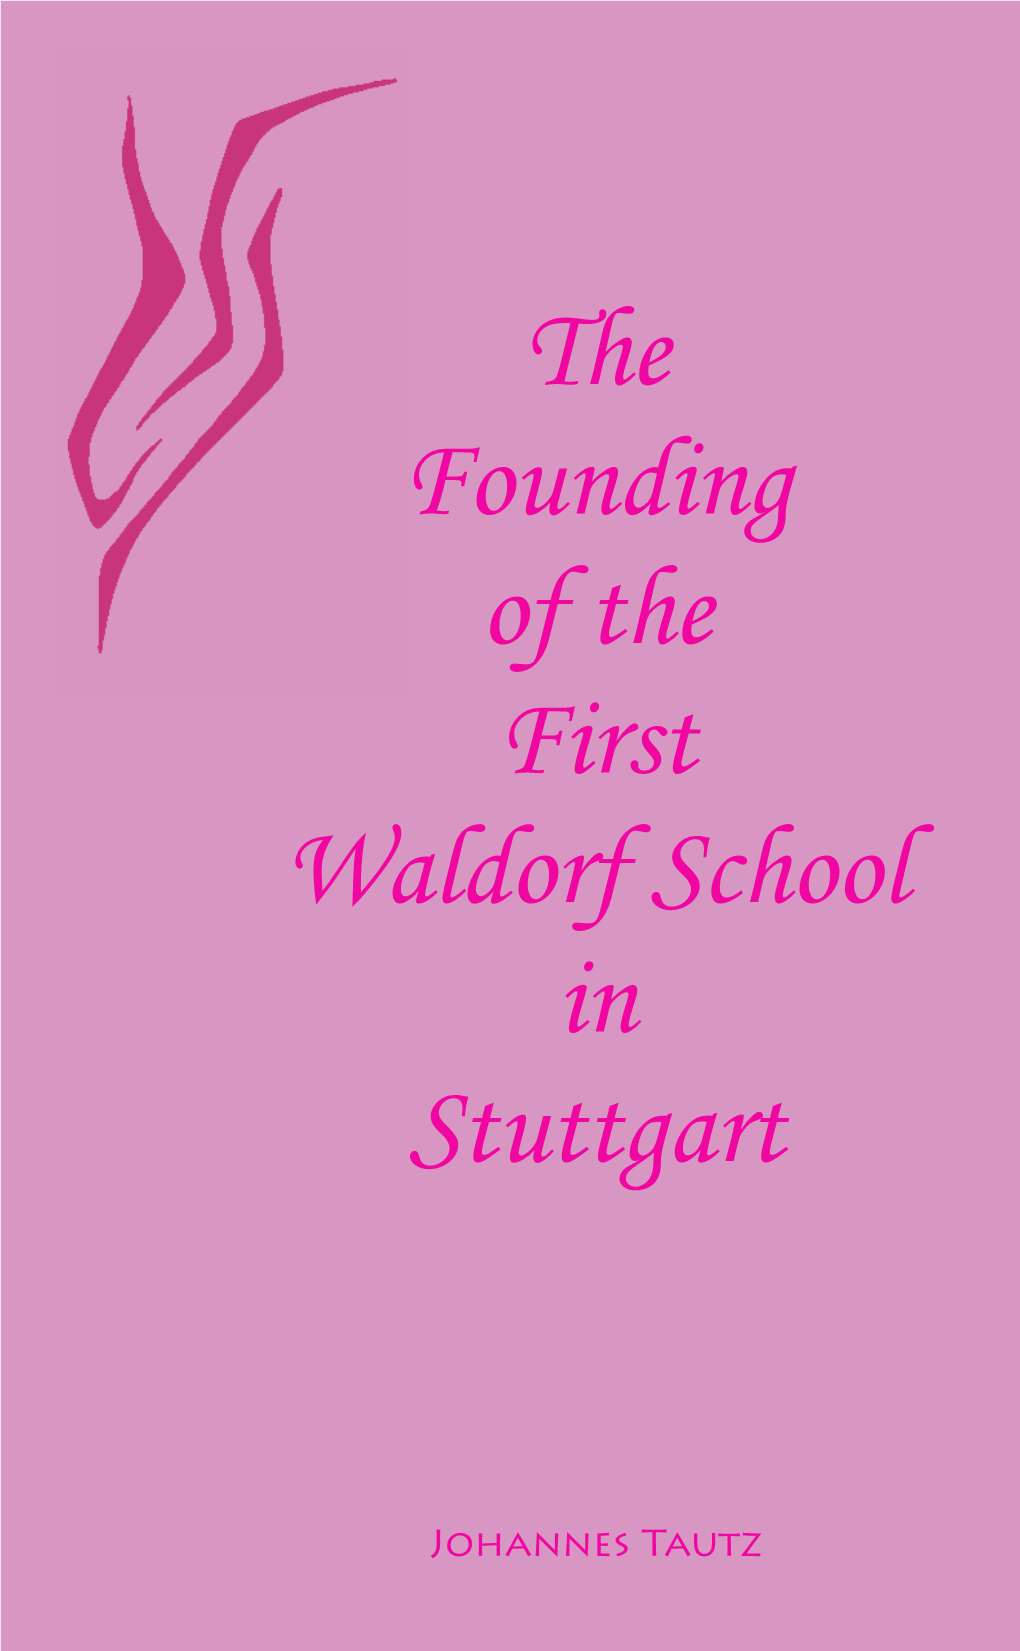 The Founding of the First Waldorf School in Stuttgart